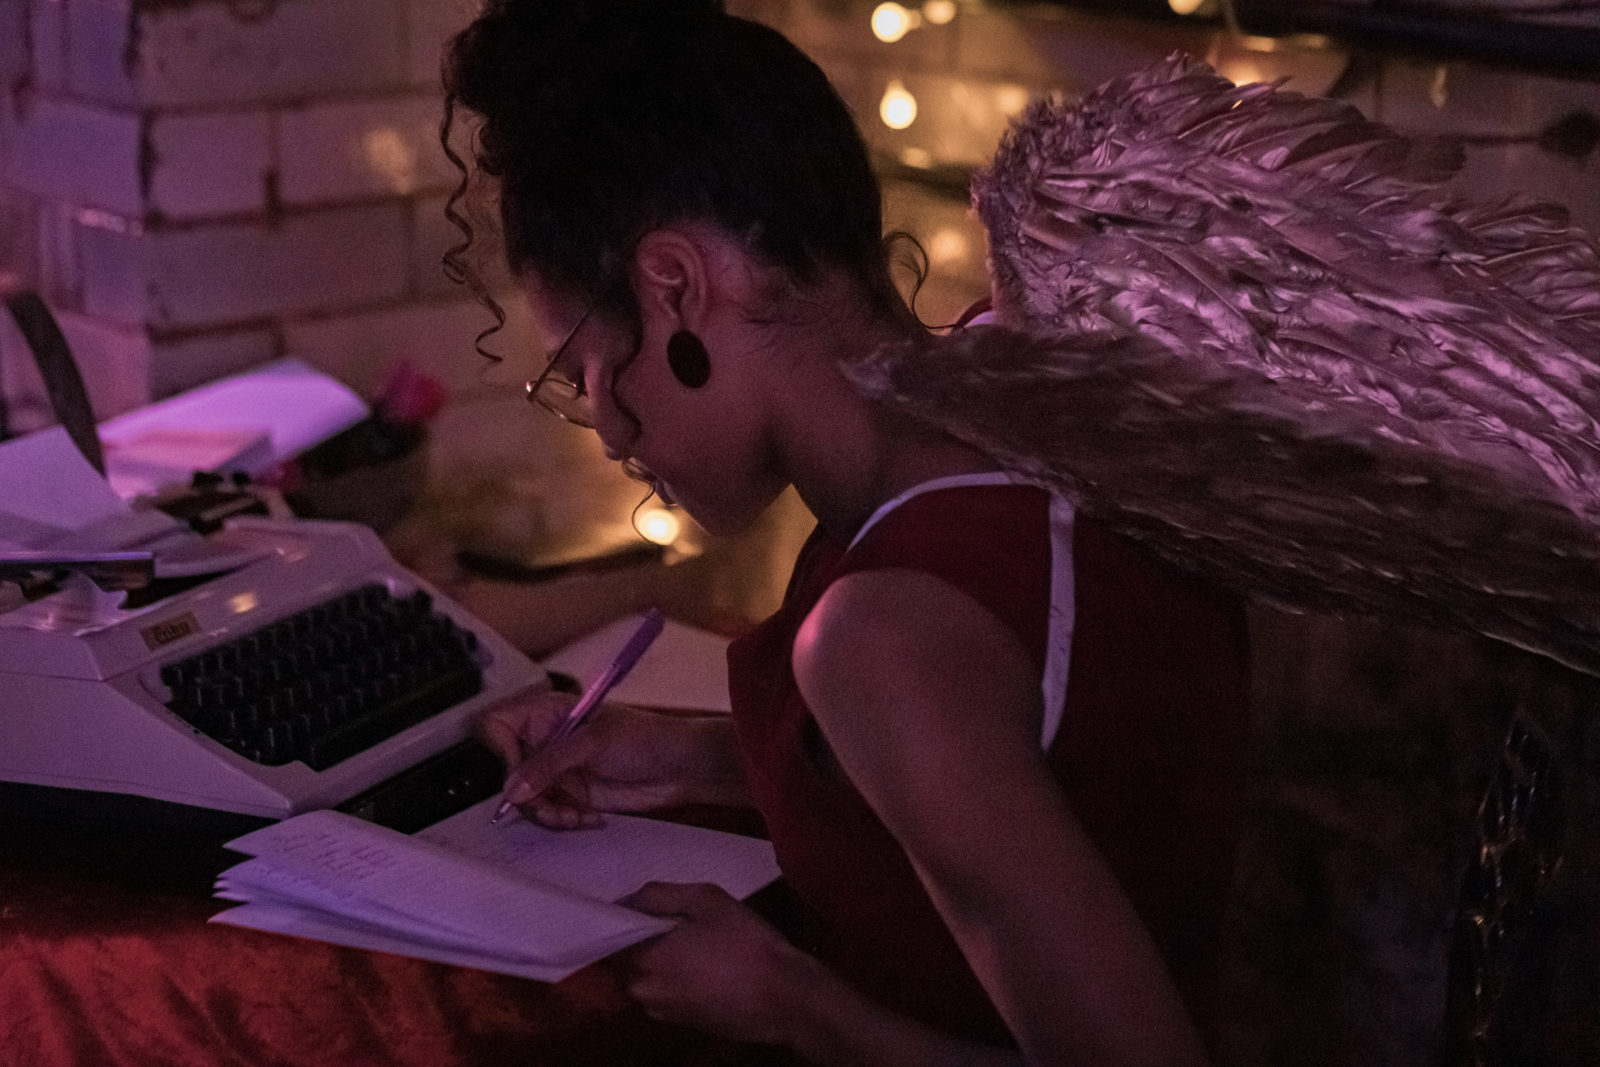 A young woman is sat at a table writing in a notepad. Next to her is a typewriter. She is wearing silvery angel wings.